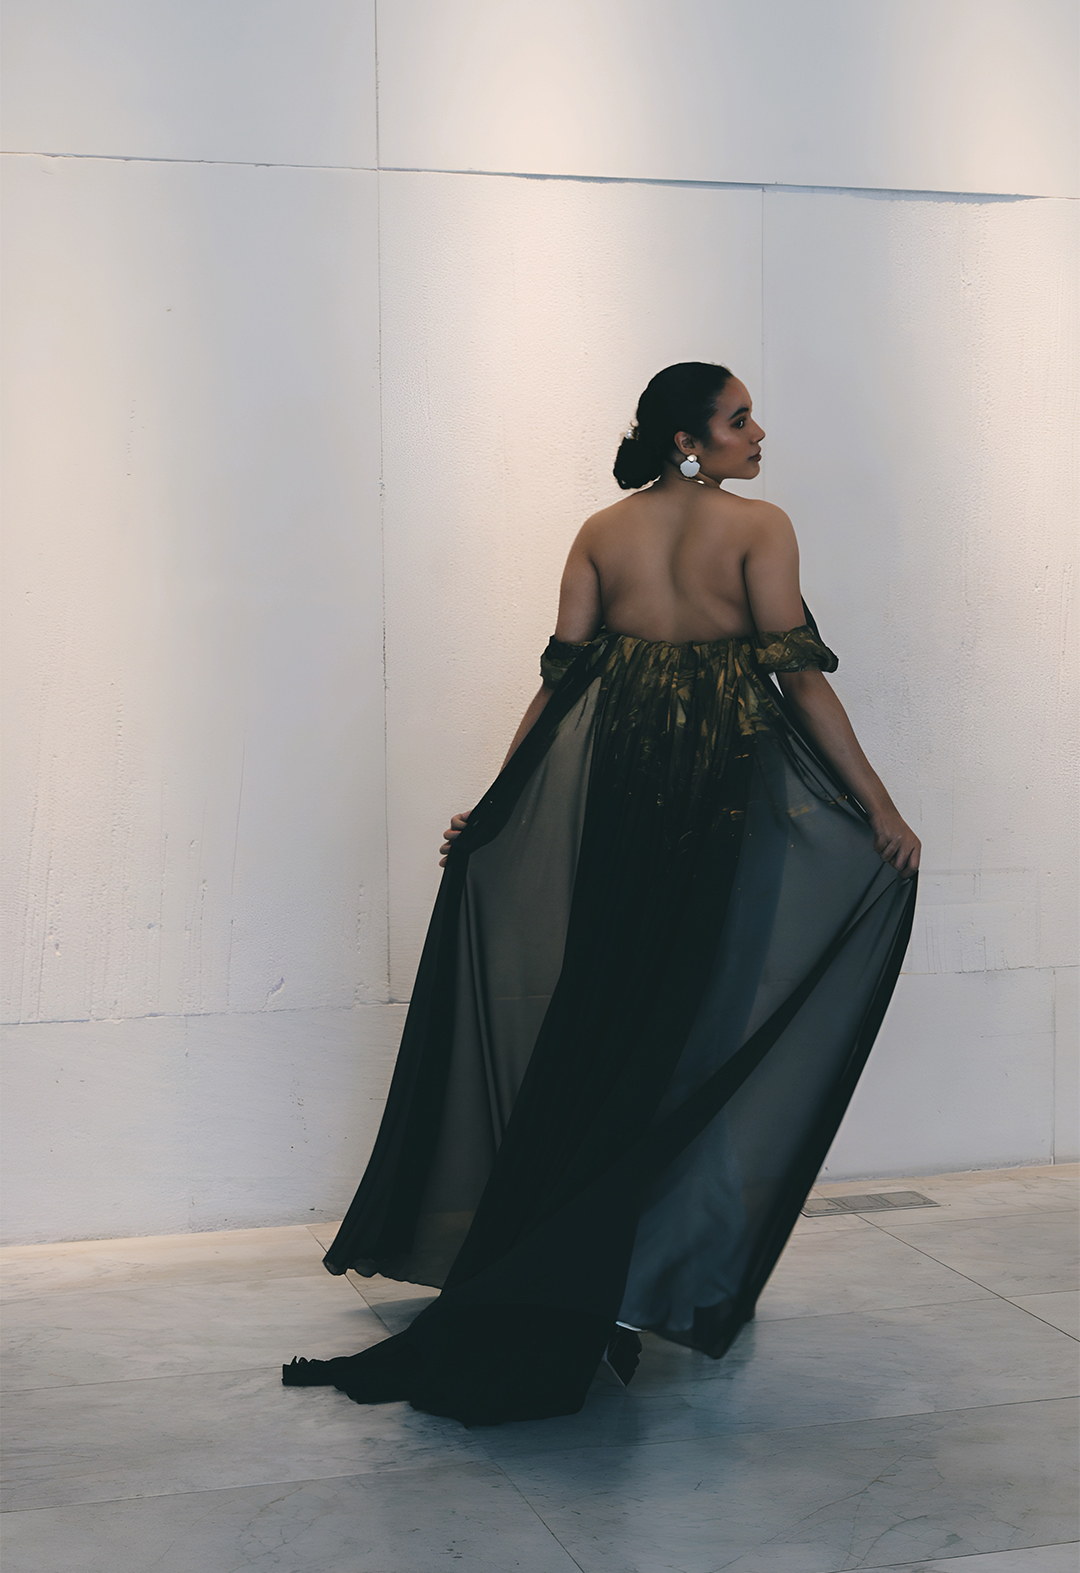 Image of the back of the model wearing a flowing navy blue chiffon train with hand-painted gold accents.